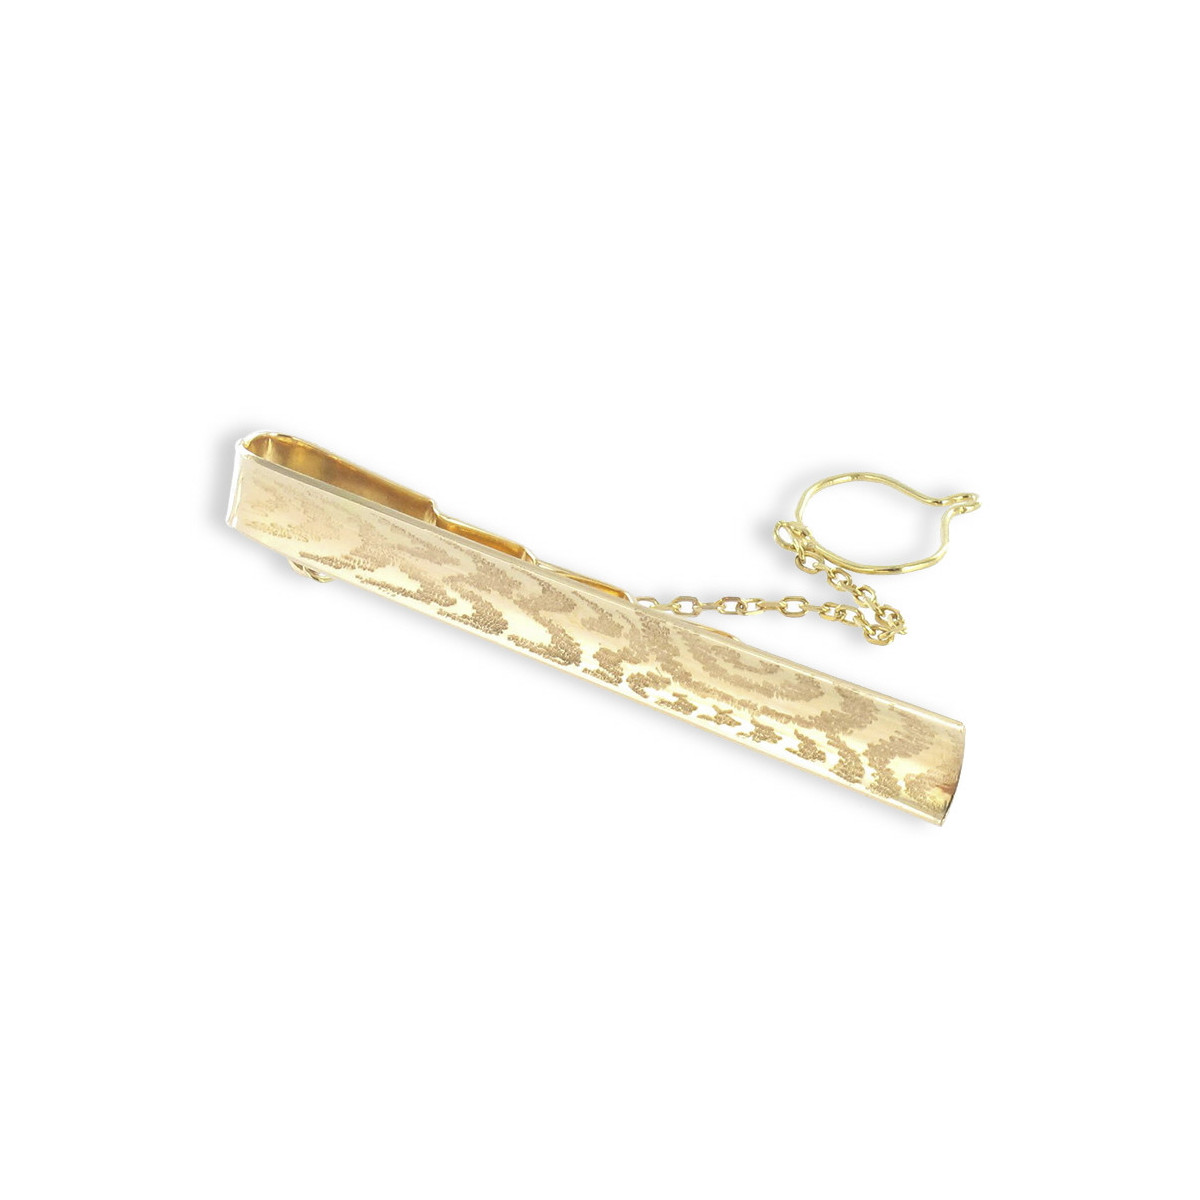 GOLD CONCAVE TIE PIN